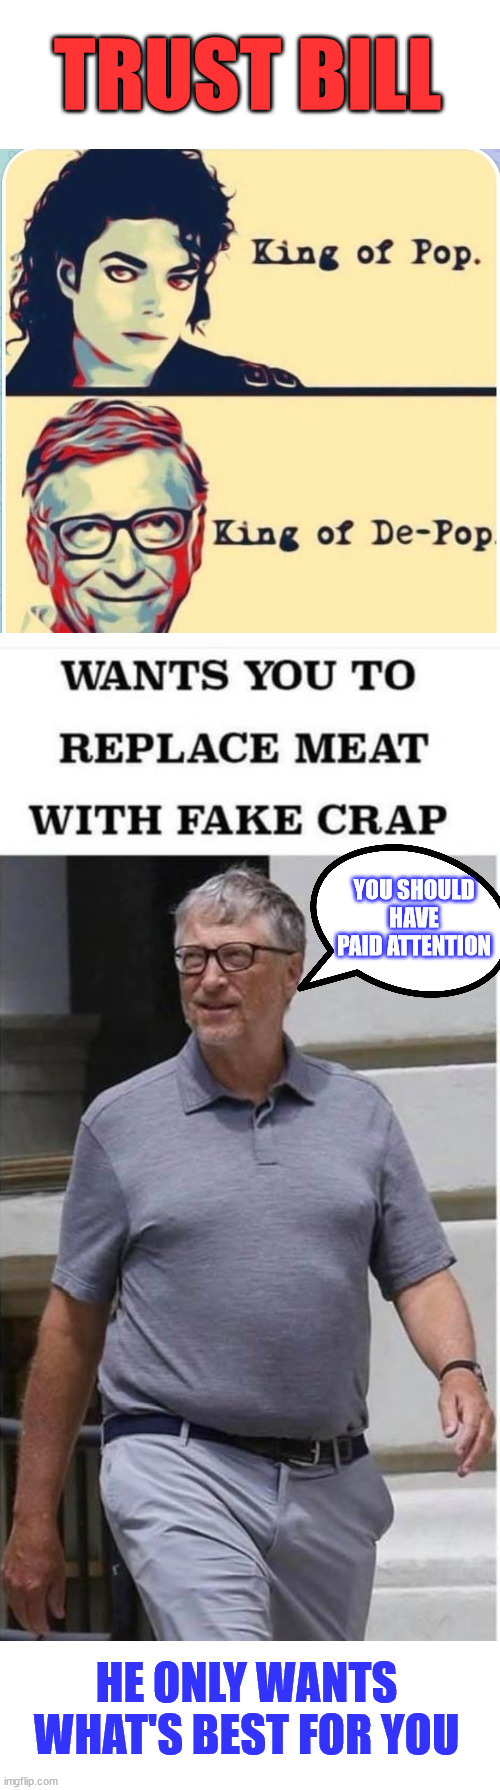 Bill has an agenda... | TRUST BILL; YOU SHOULD HAVE PAID ATTENTION; HE ONLY WANTS WHAT'S BEST FOR YOU | image tagged in bill gates,bill gates loves vaccines,genocide,fake,meat | made w/ Imgflip meme maker